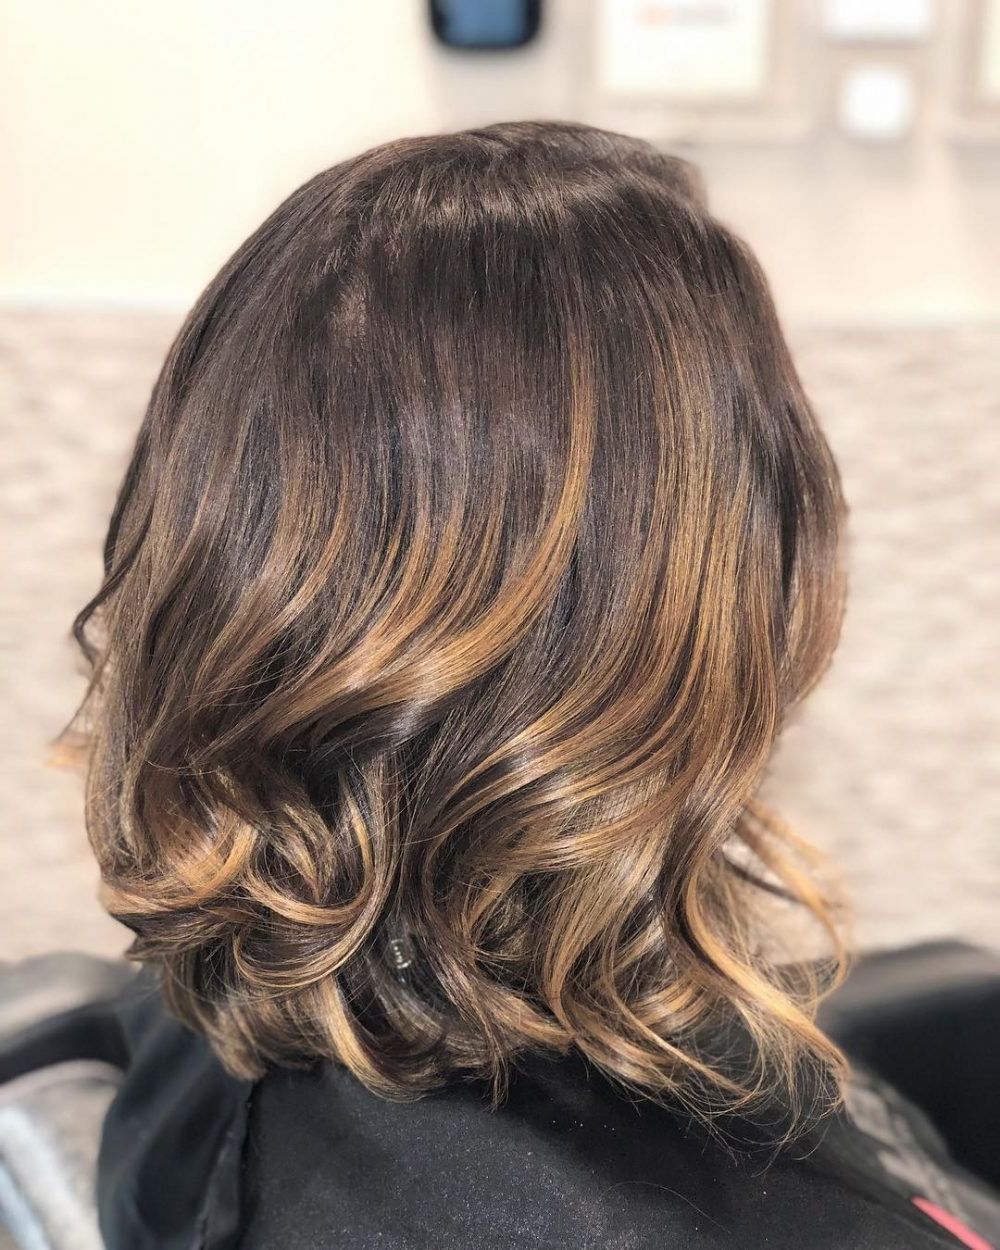 50 Best Caramel Highlight Ideas For Every Skin Tone For Well Known Lob Hairstyle With Warm Highlights (View 20 of 20)